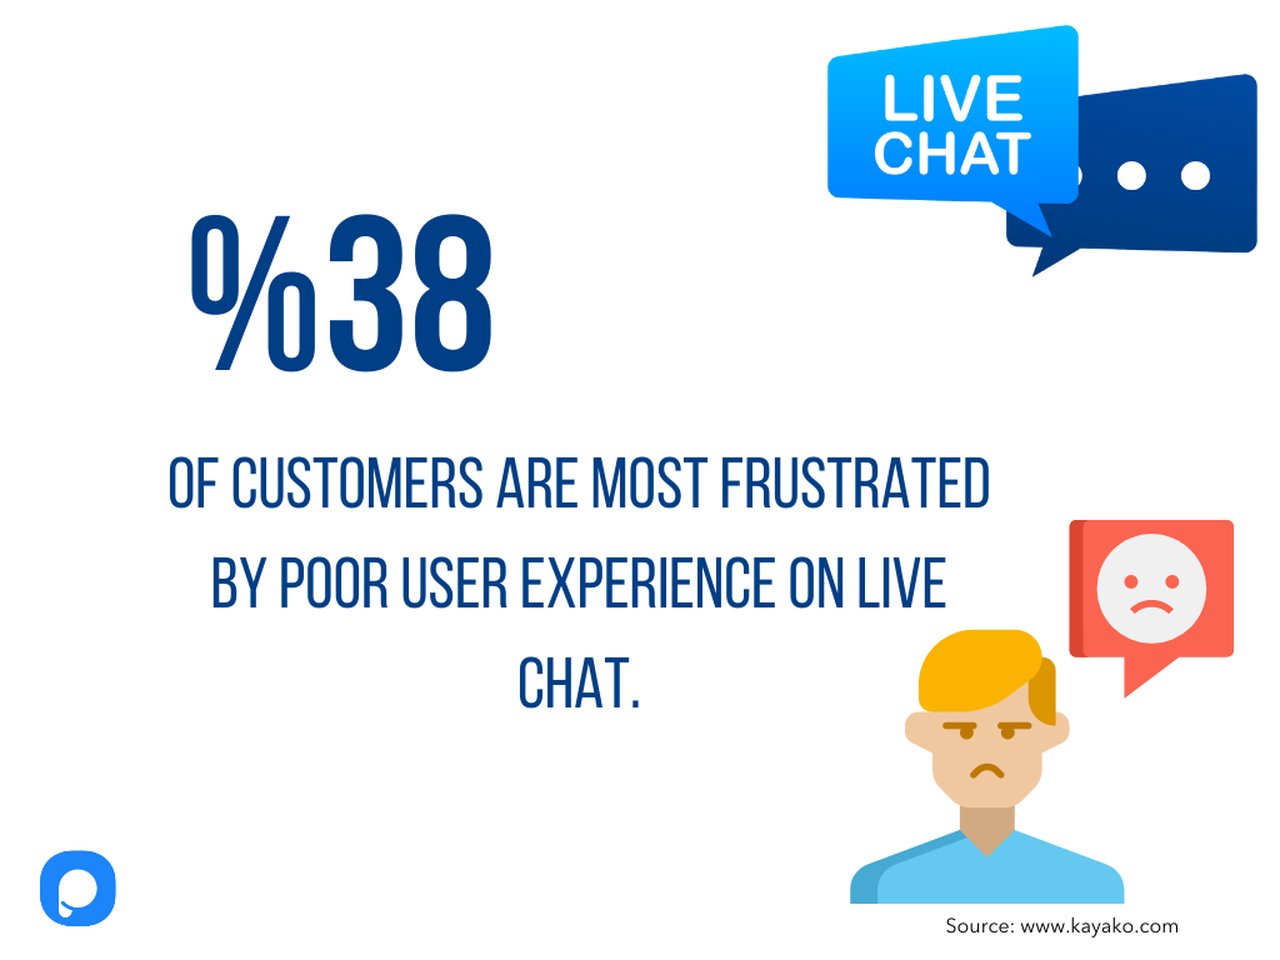 an image with a live chat poor user experience statistic with the illustration of a man in the right hand bottom corner with a sad face bubble next to his head and live chat writter speech bubble in the upper right corner